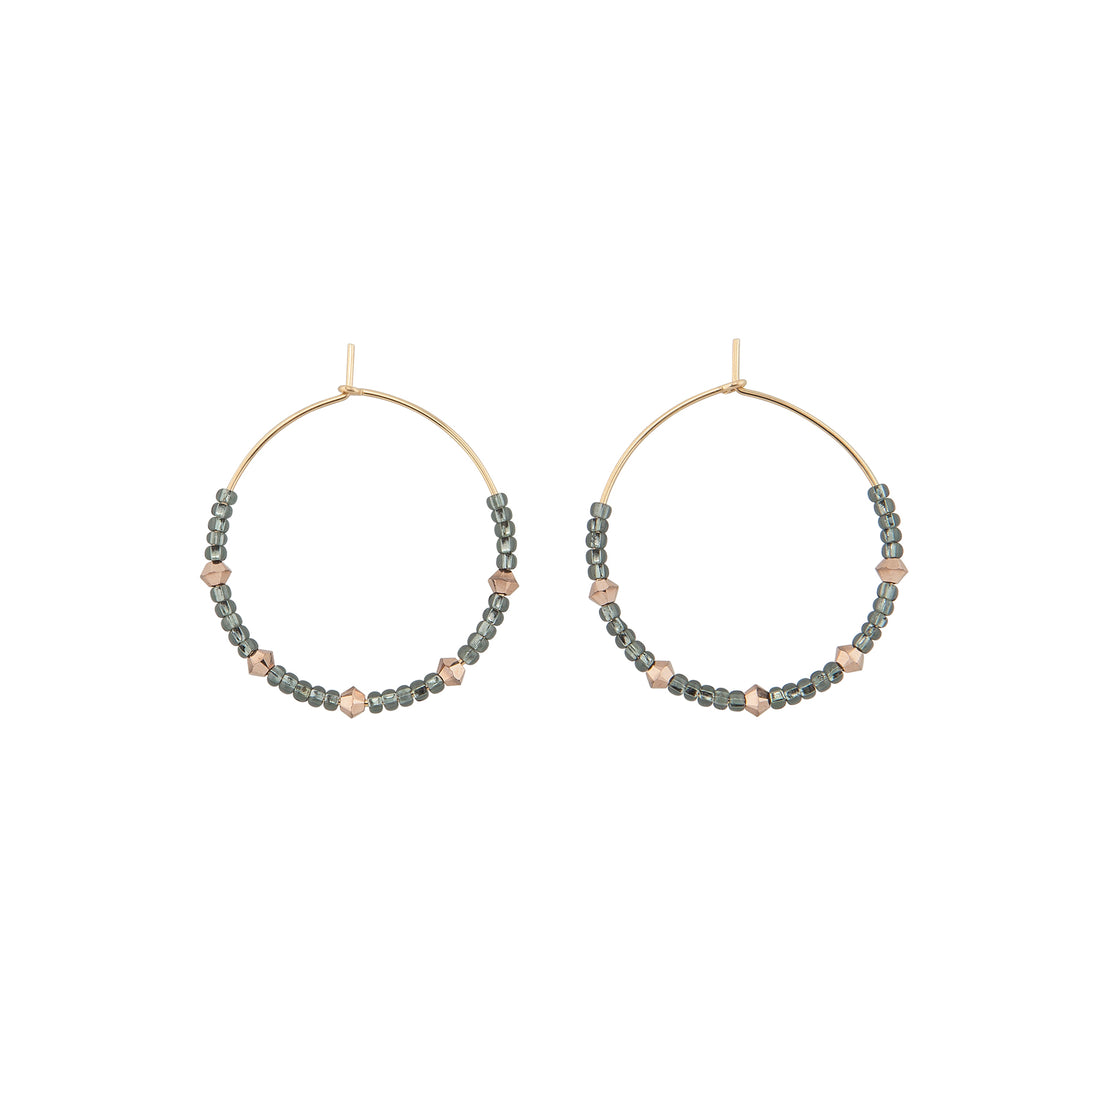 Small Crystal Hoops - SHINY GRAPHITE